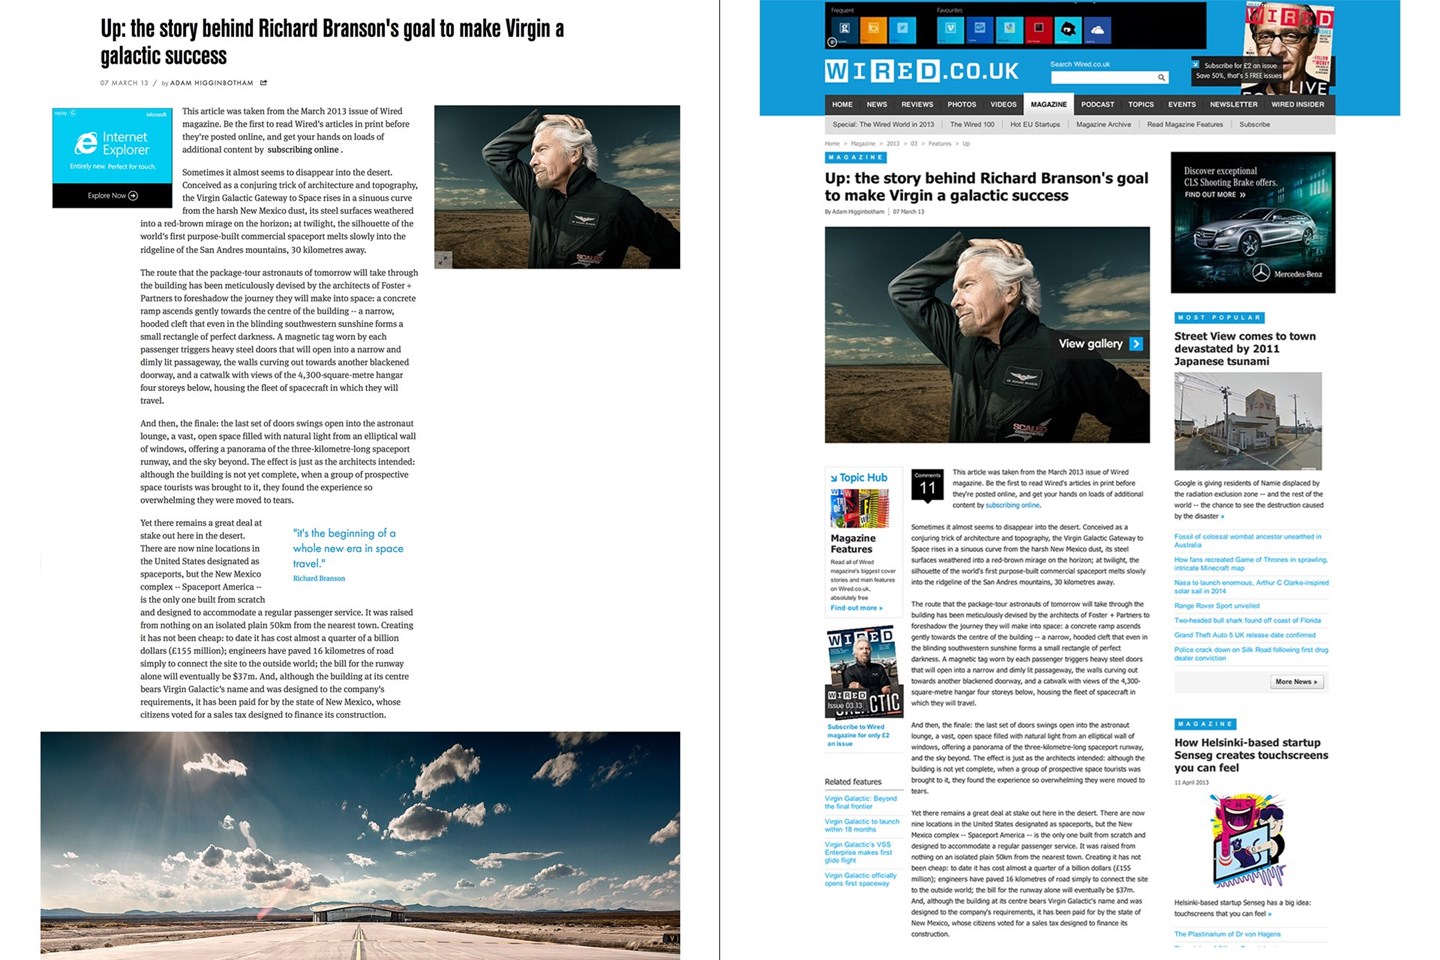 The old Wired artice template next to the new Wired article template